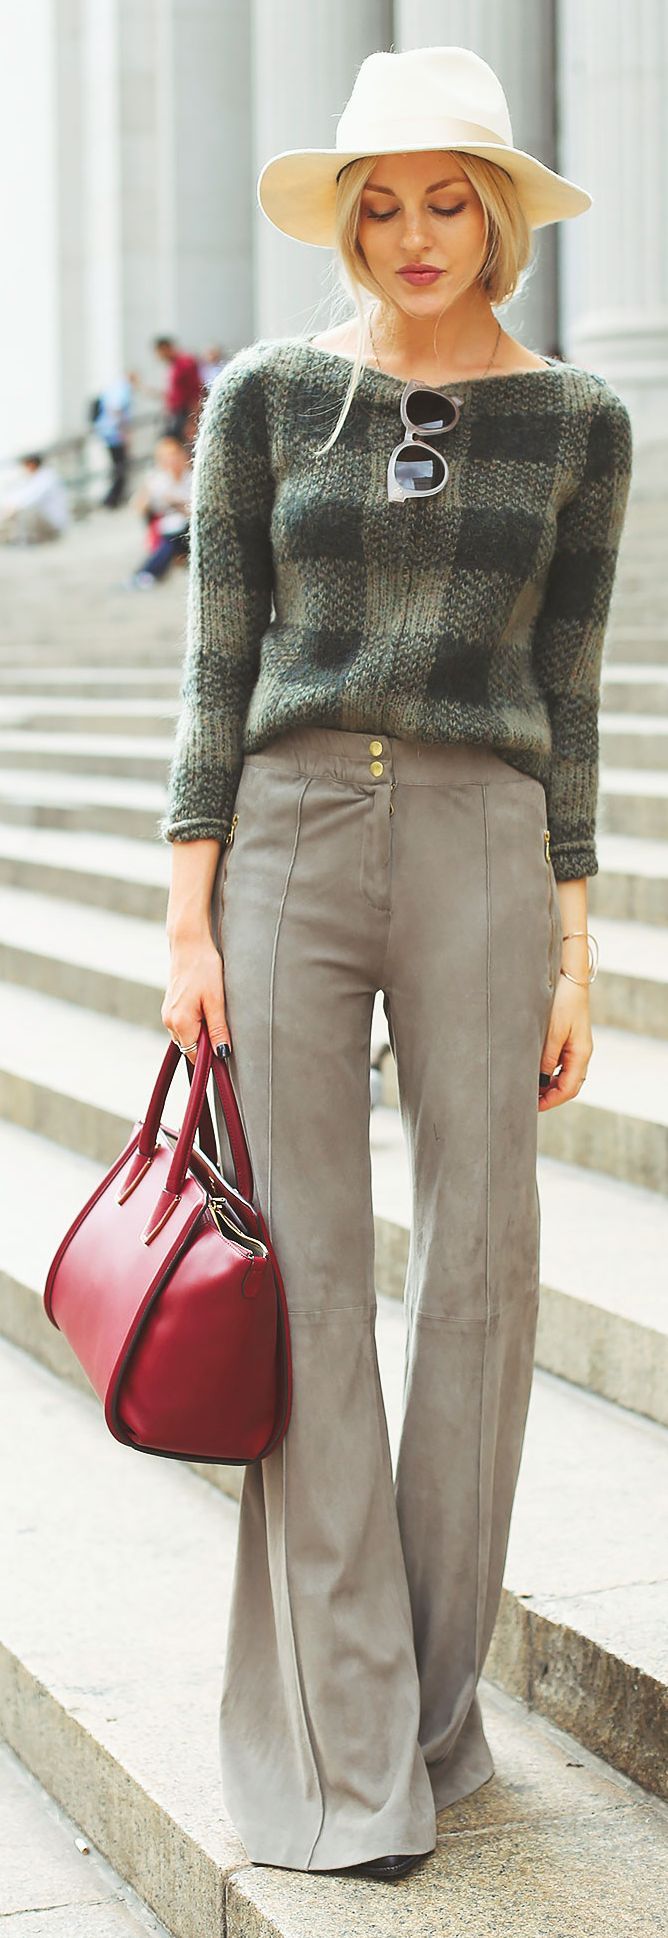 23 Ways to Wear Suede This Fall/Winter